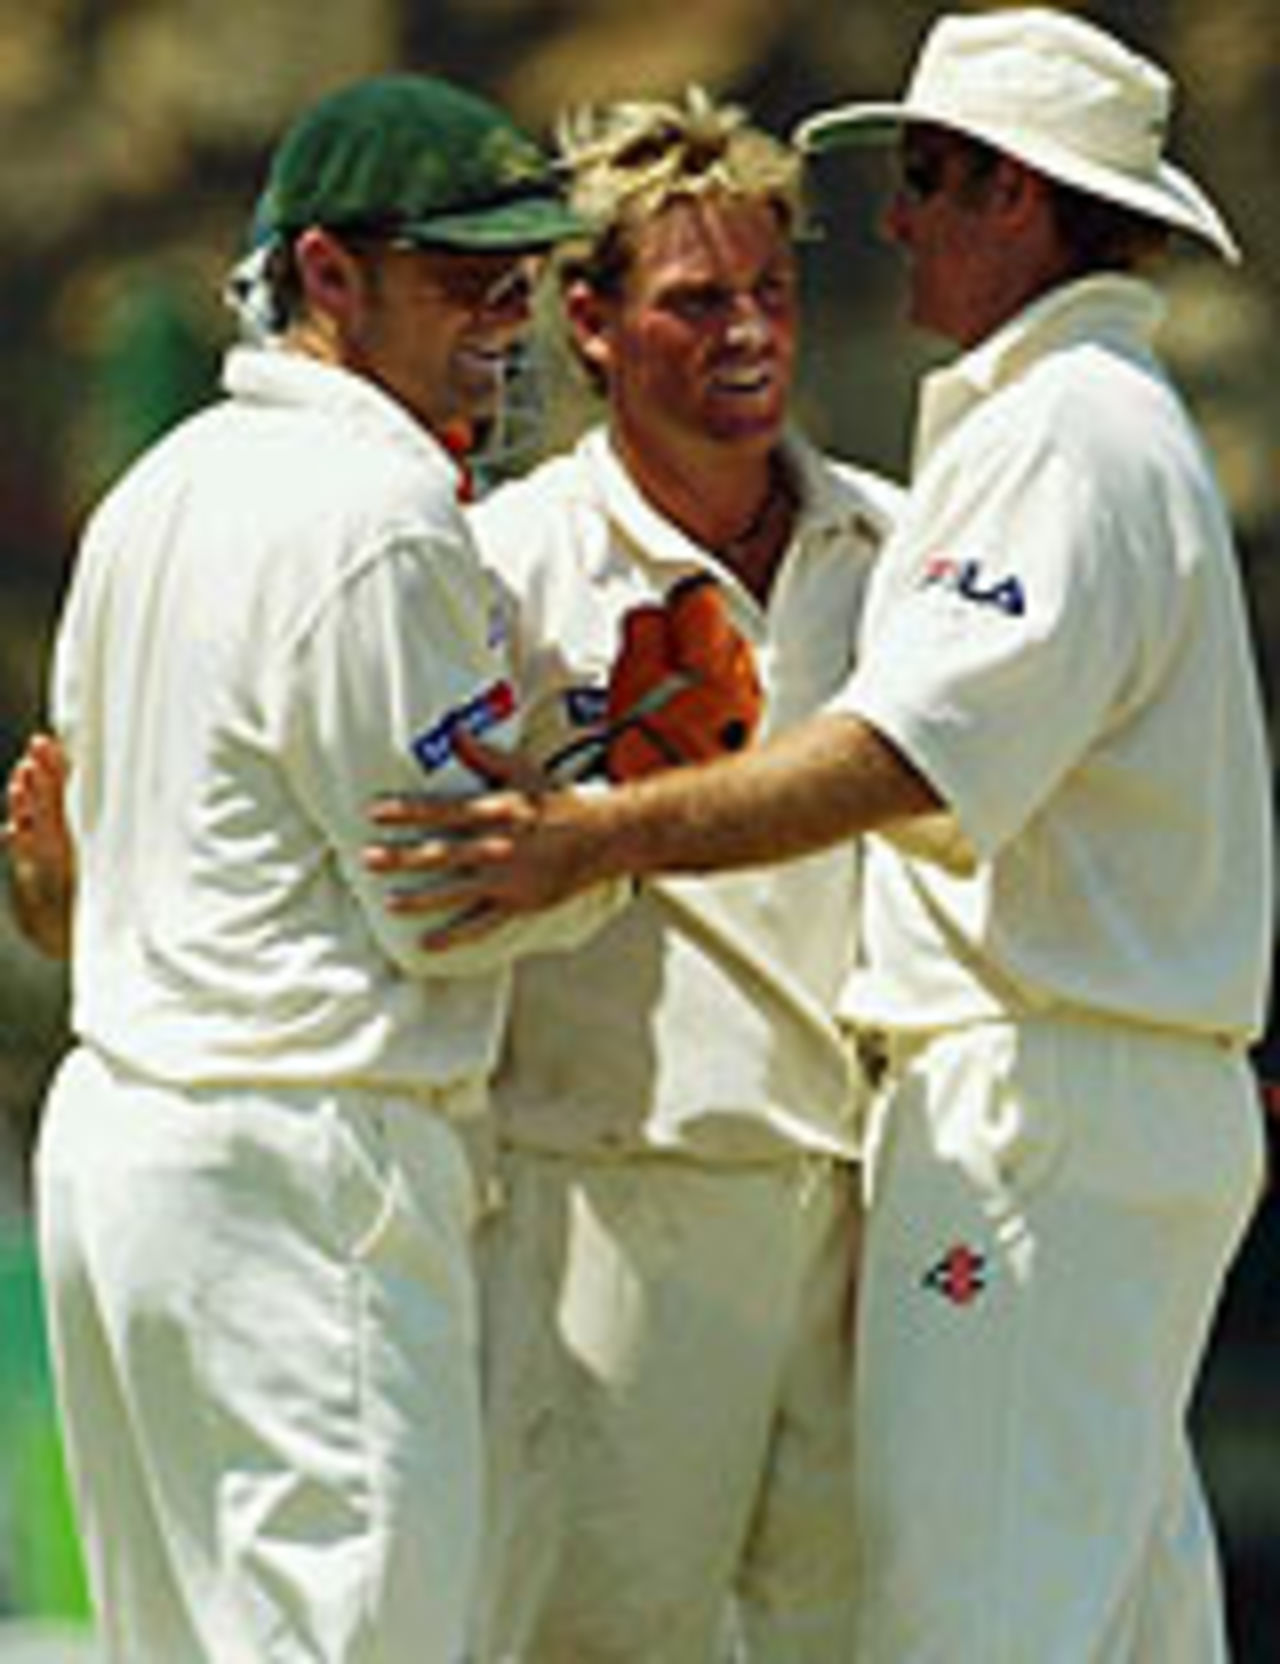 Shane Warne is congratulated by his team-mates after the wicket of Upul Chandana, Sri Lanka v Australia, 3rd Test, Galle, 3rd day, March 10, 2004